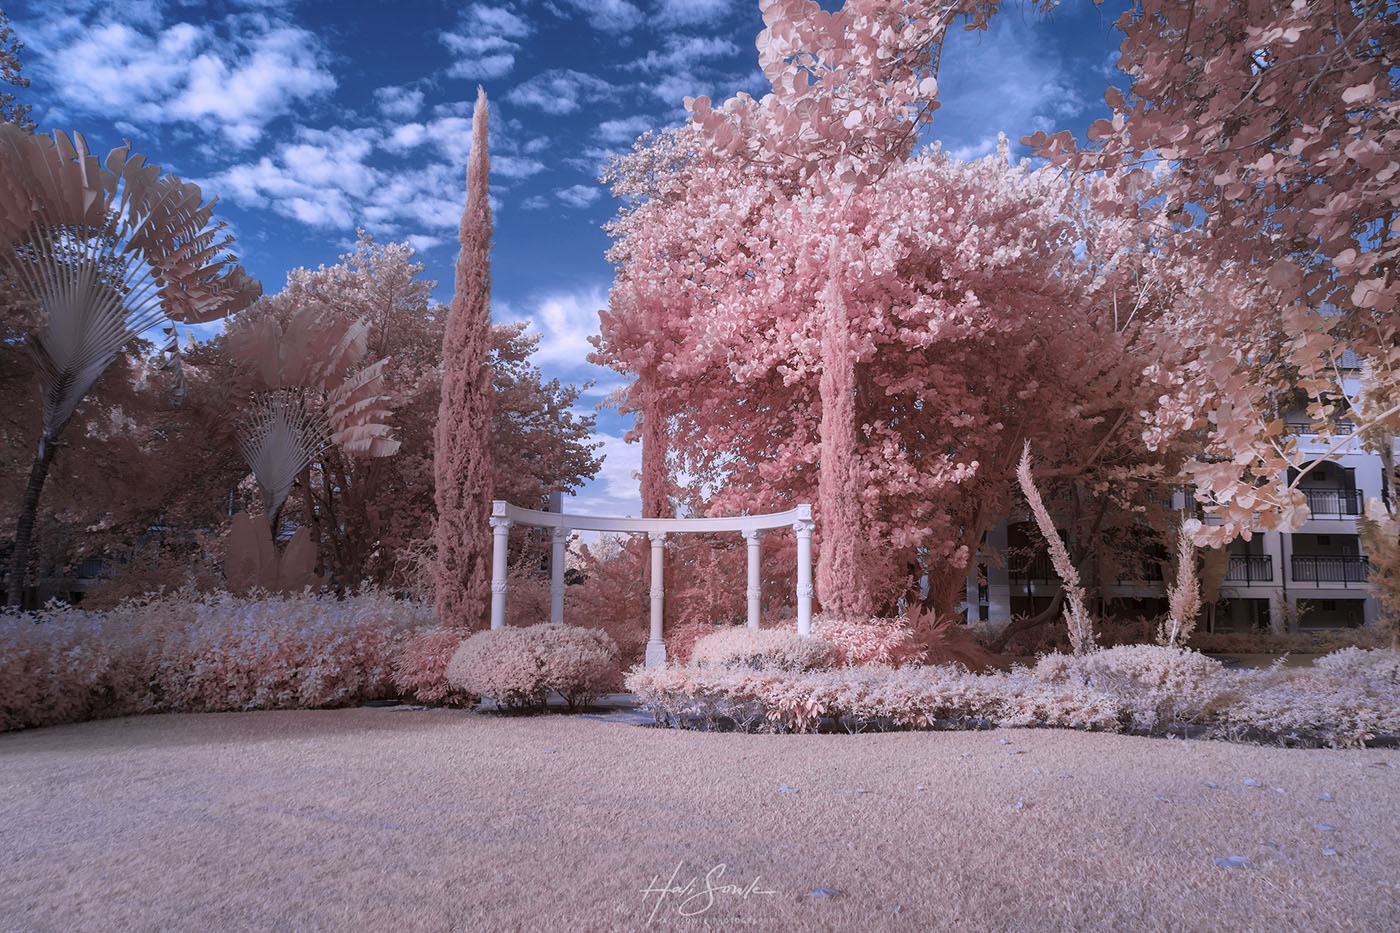 2019_09_Sandals-SouthCoast-10890-Edit1000.jpg - Faux color infrared from an early morning walk.